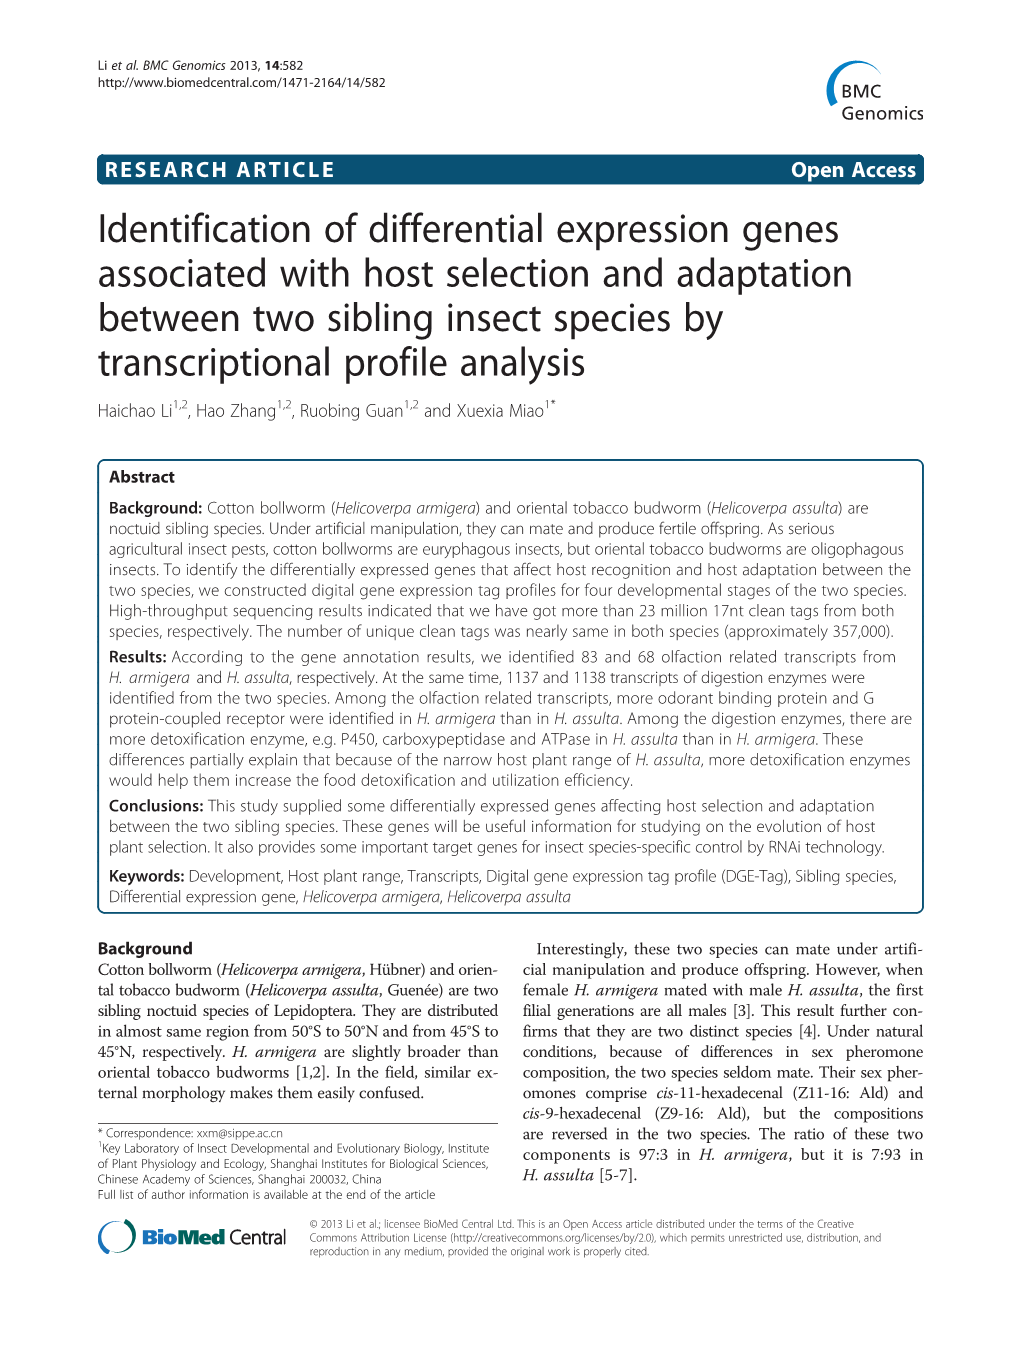 Identification of Differential Expression Genes Associated with Host Selection and Adaptation Between Two Sibling Insect Species